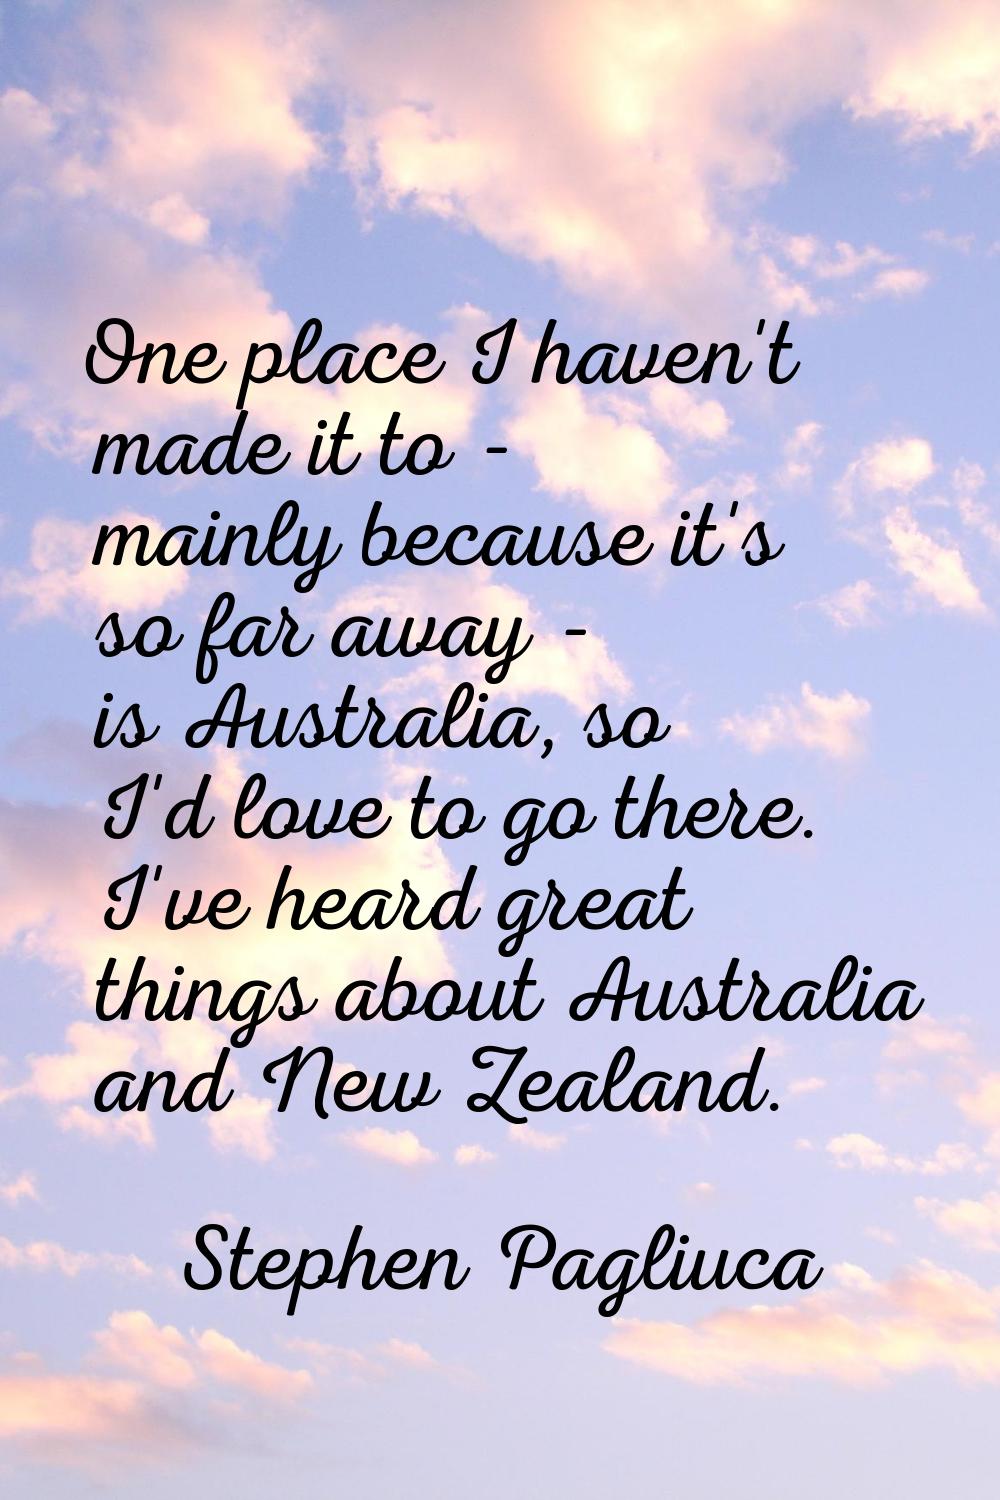 One place I haven't made it to - mainly because it's so far away - is Australia, so I'd love to go 